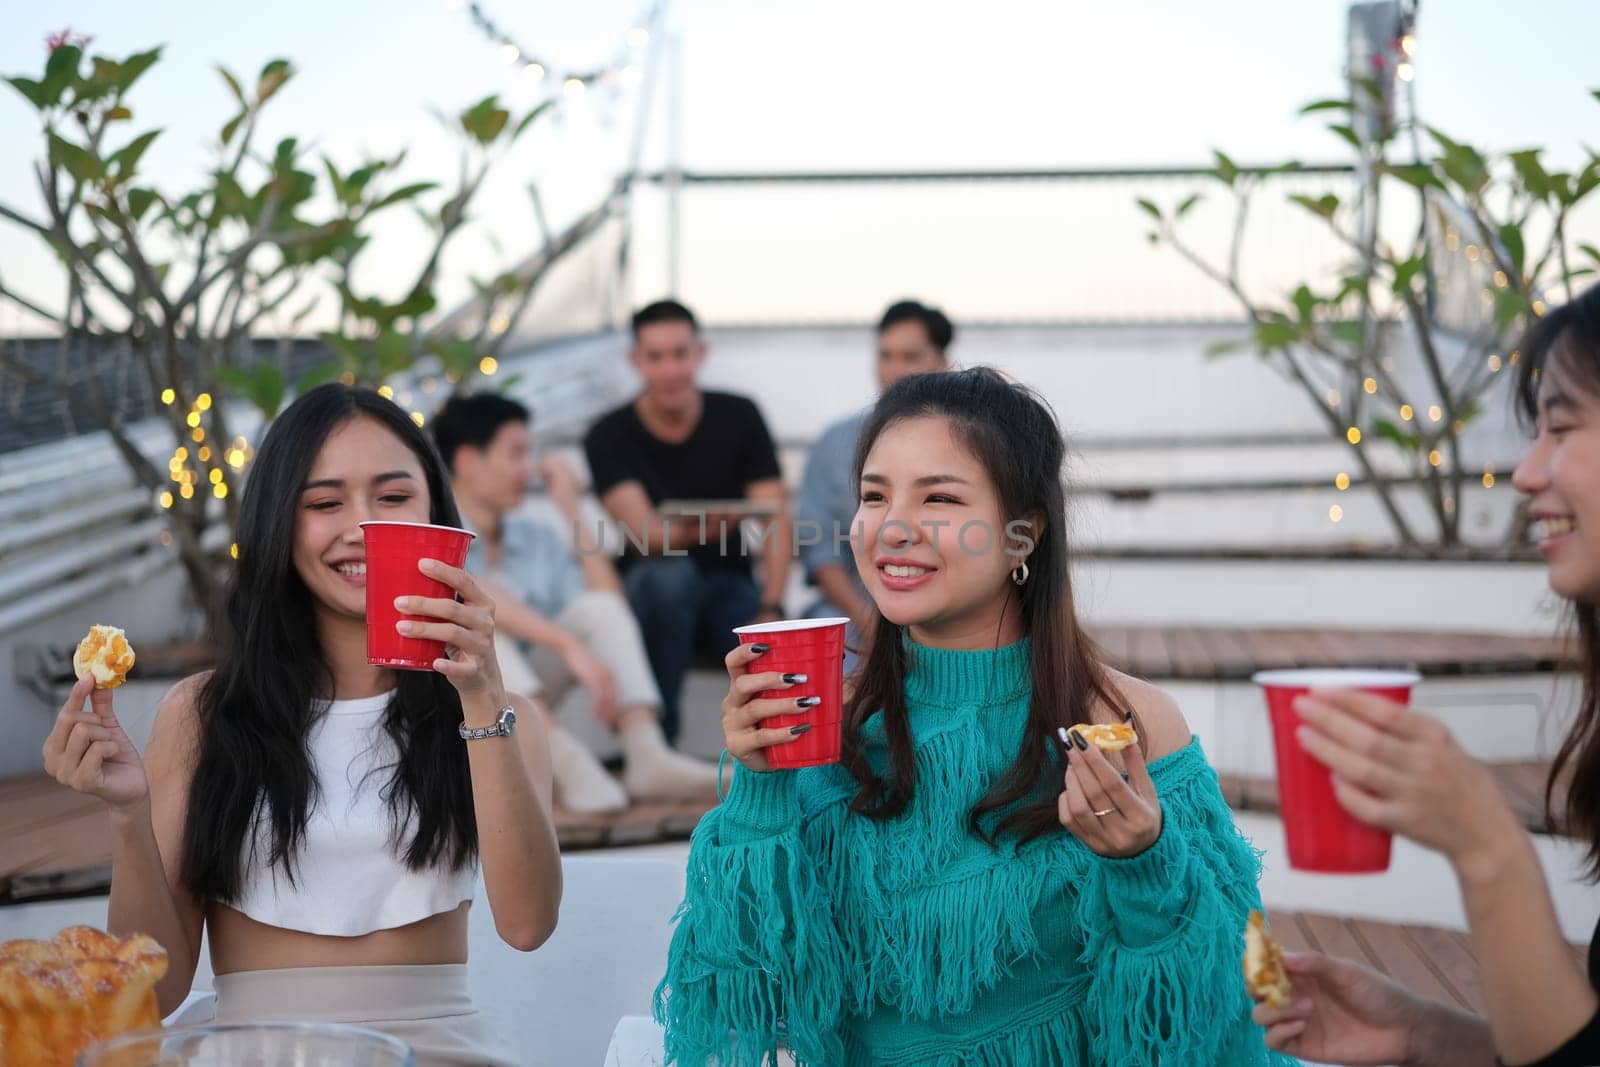 Cheerful young people having fun chatting together at a rooftop party